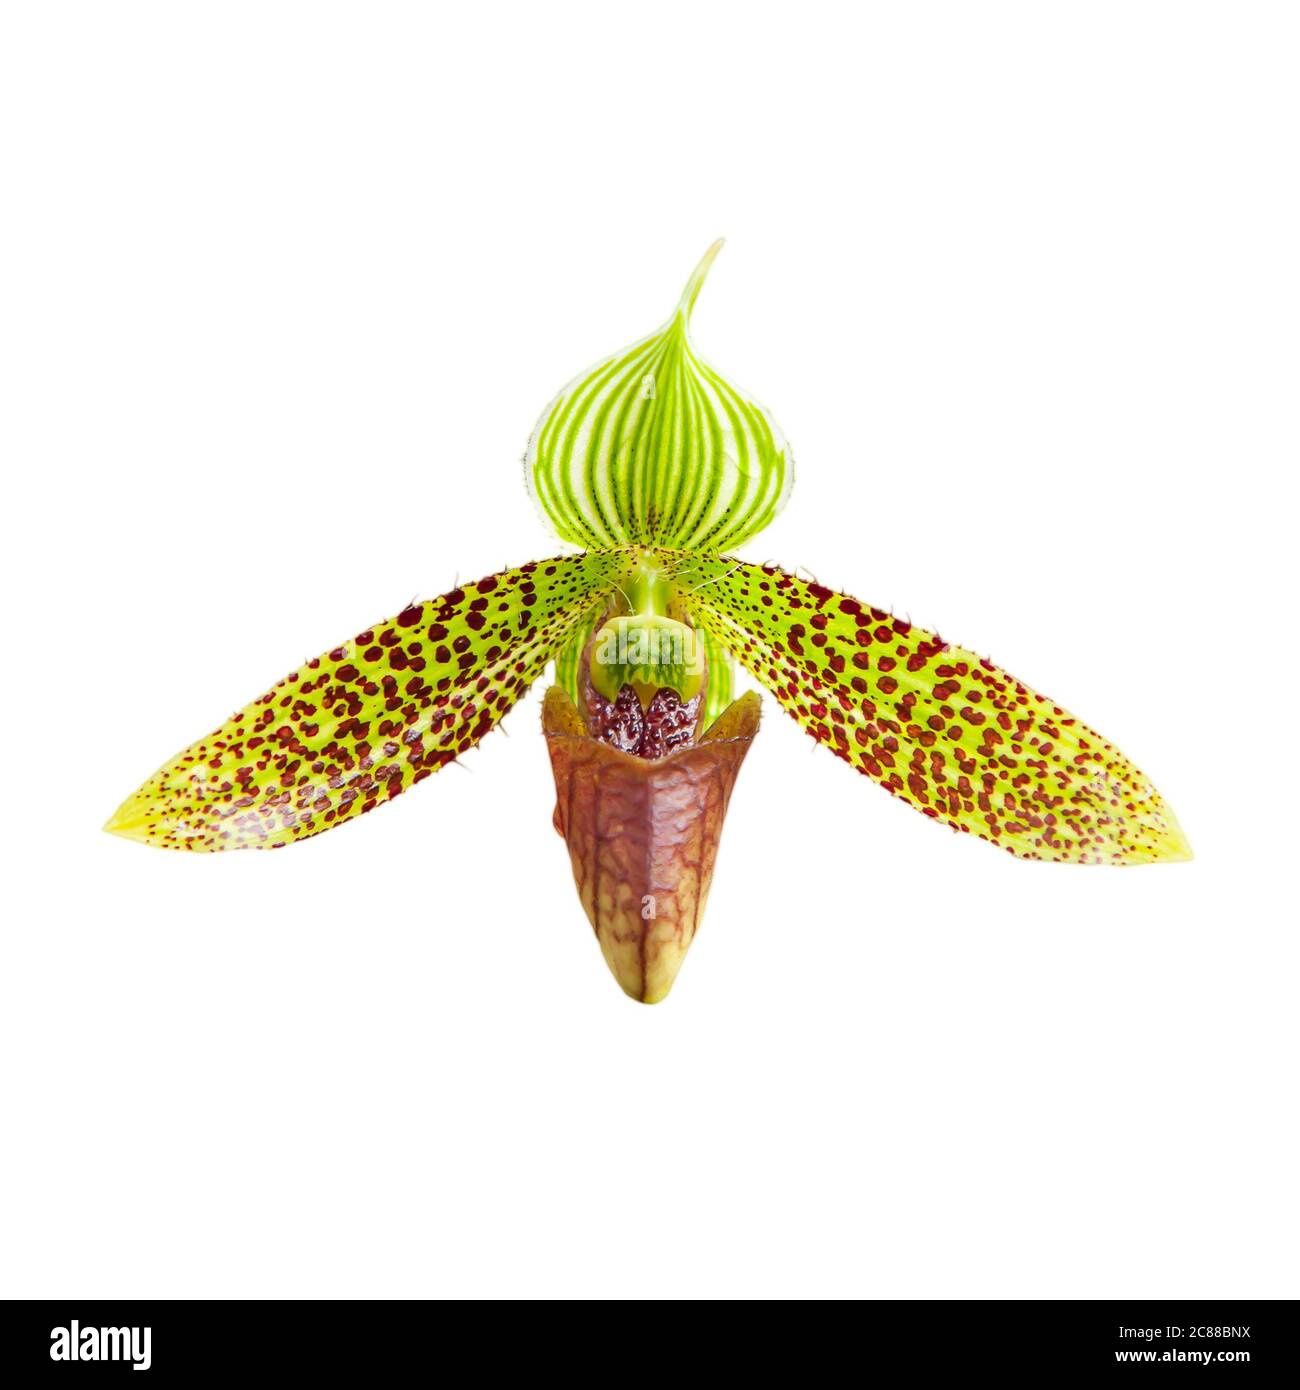 The Sukhakul’s Paphiopedilum is in bloom, Sukhakul’s Paphiopedilum is a species of orchid endemic to northern Thailand. Isolated on white background. Stock Photo